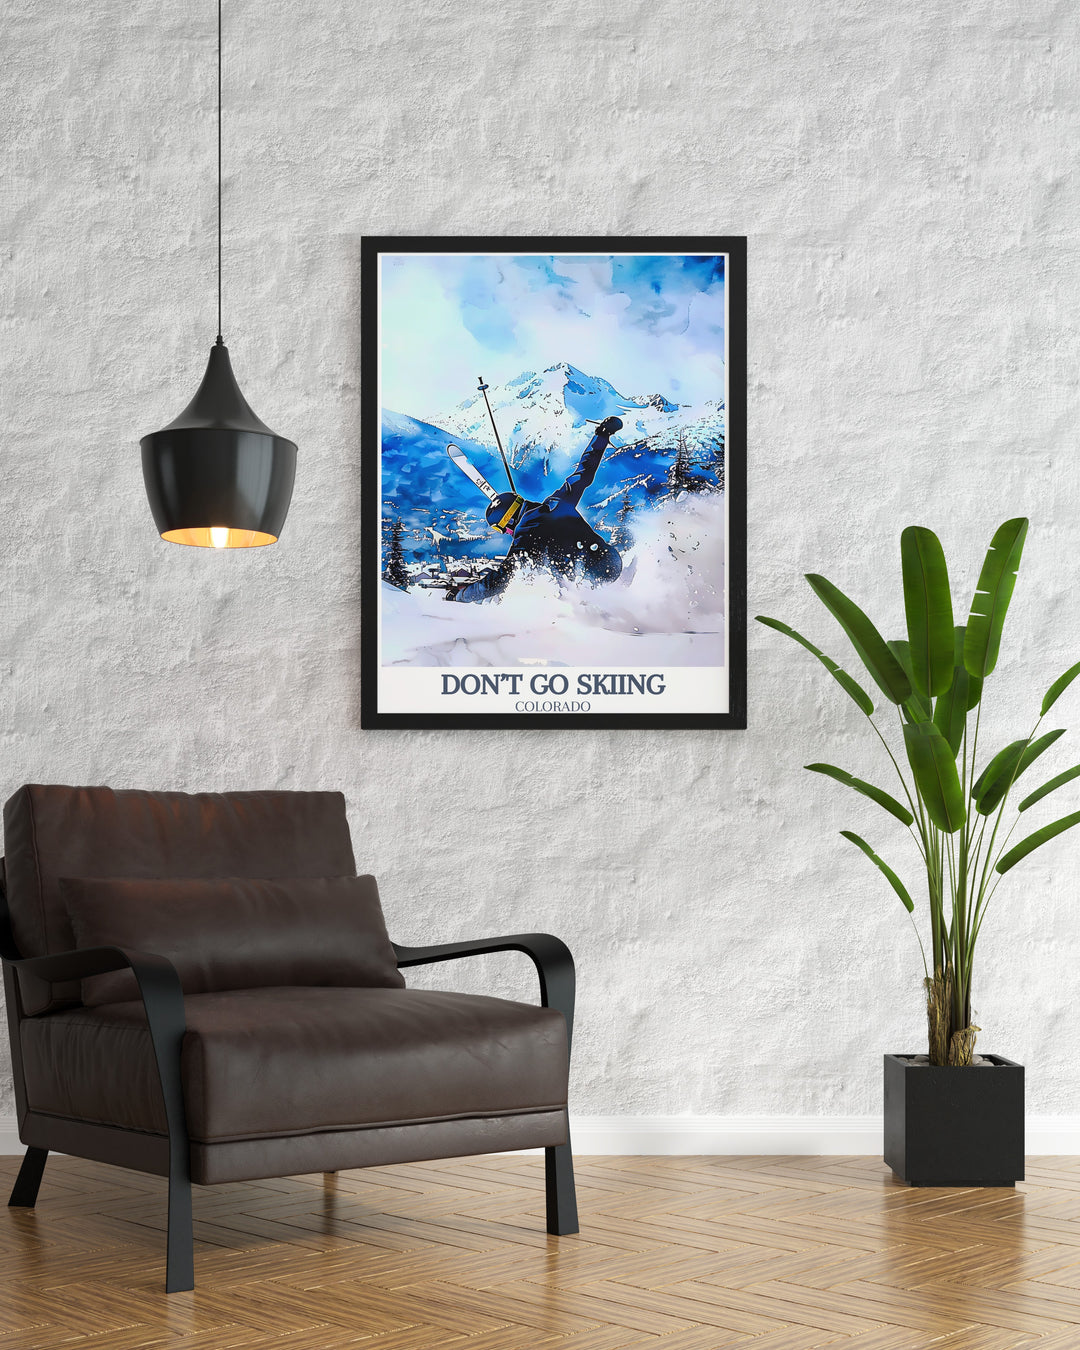 Aspen, Colorado, USA snowboarding print featuring a retro design. This unique piece of wall art is perfect for ski enthusiasts and anyone who loves the thrill of winter sports. A must have for your home decor collection, capturing the magic of the slopes.